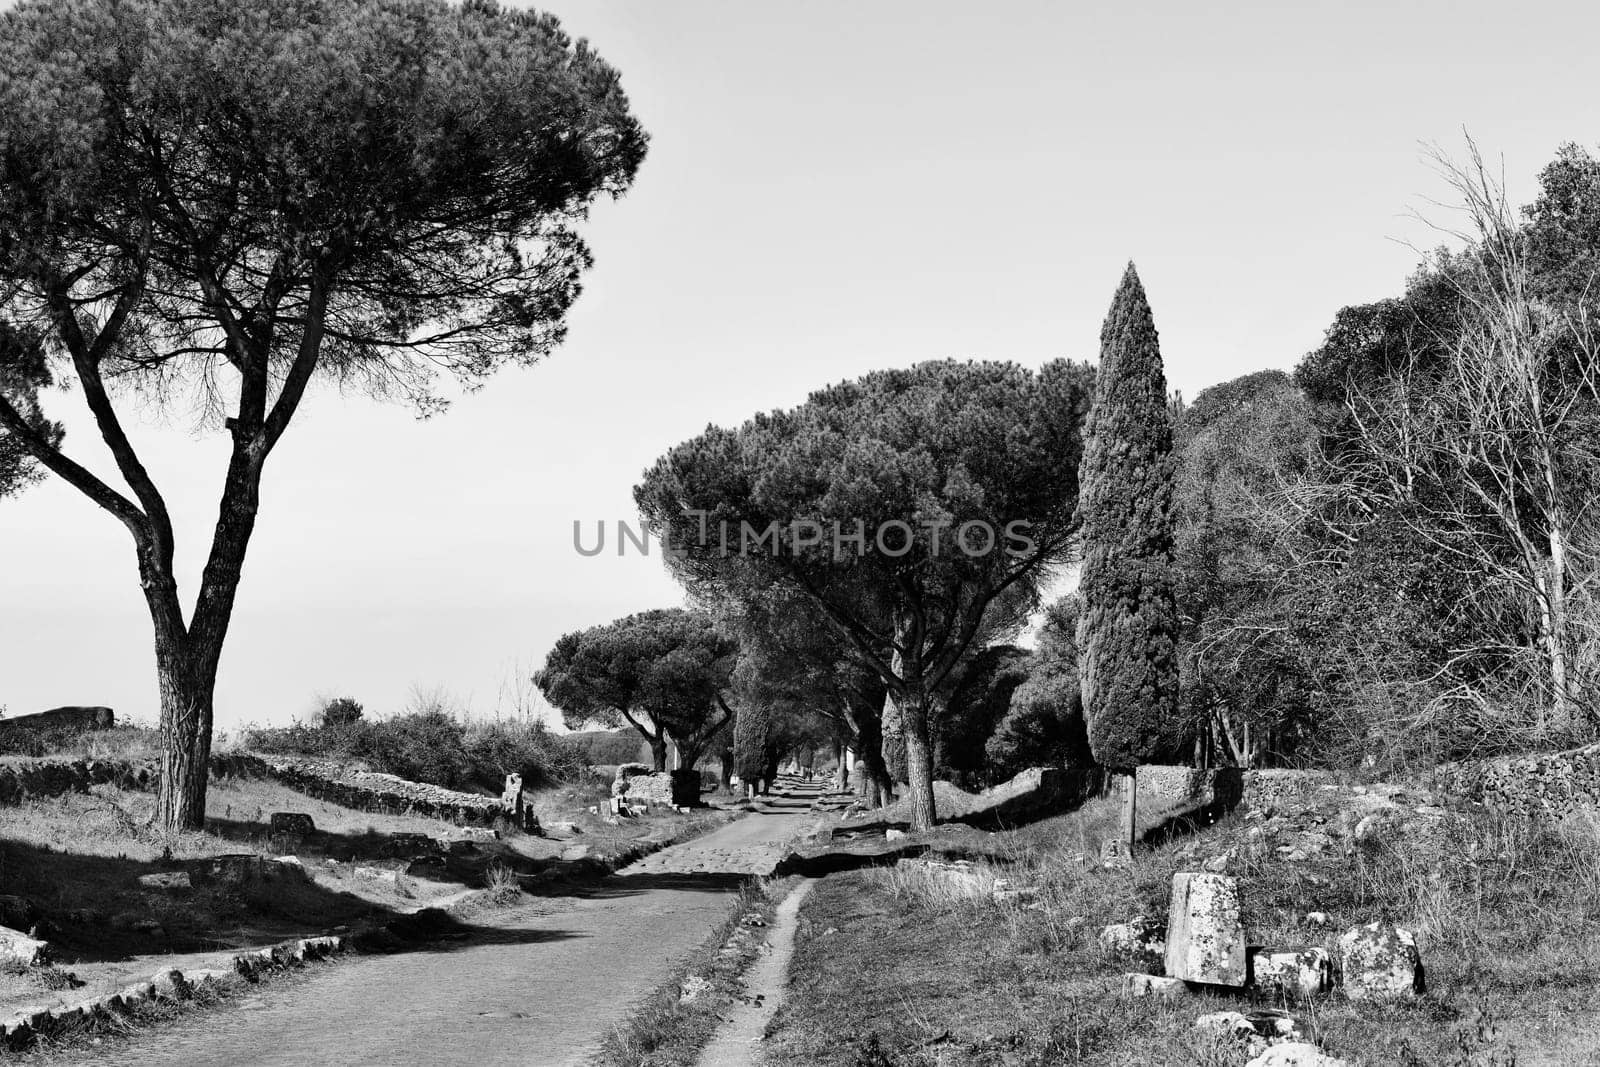 Italy , Rome , the Appian Way -Via Appia - one of the most important Roman roads of the ancient republic